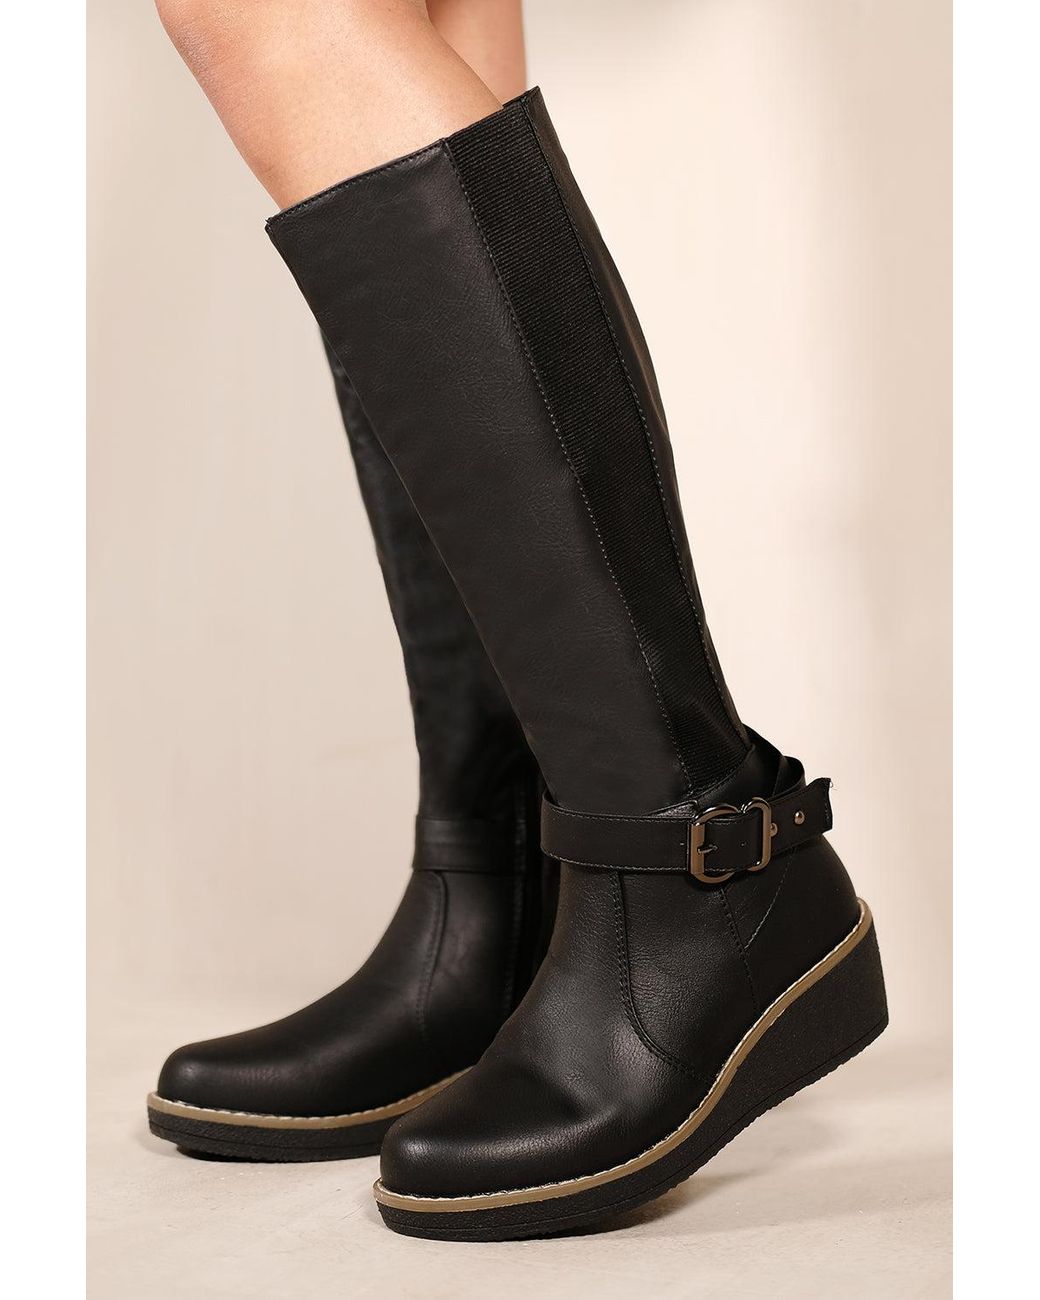 Where's That From Ayleen Wedge Heel Knee High Boots With Elastic Panel in  Black | Lyst